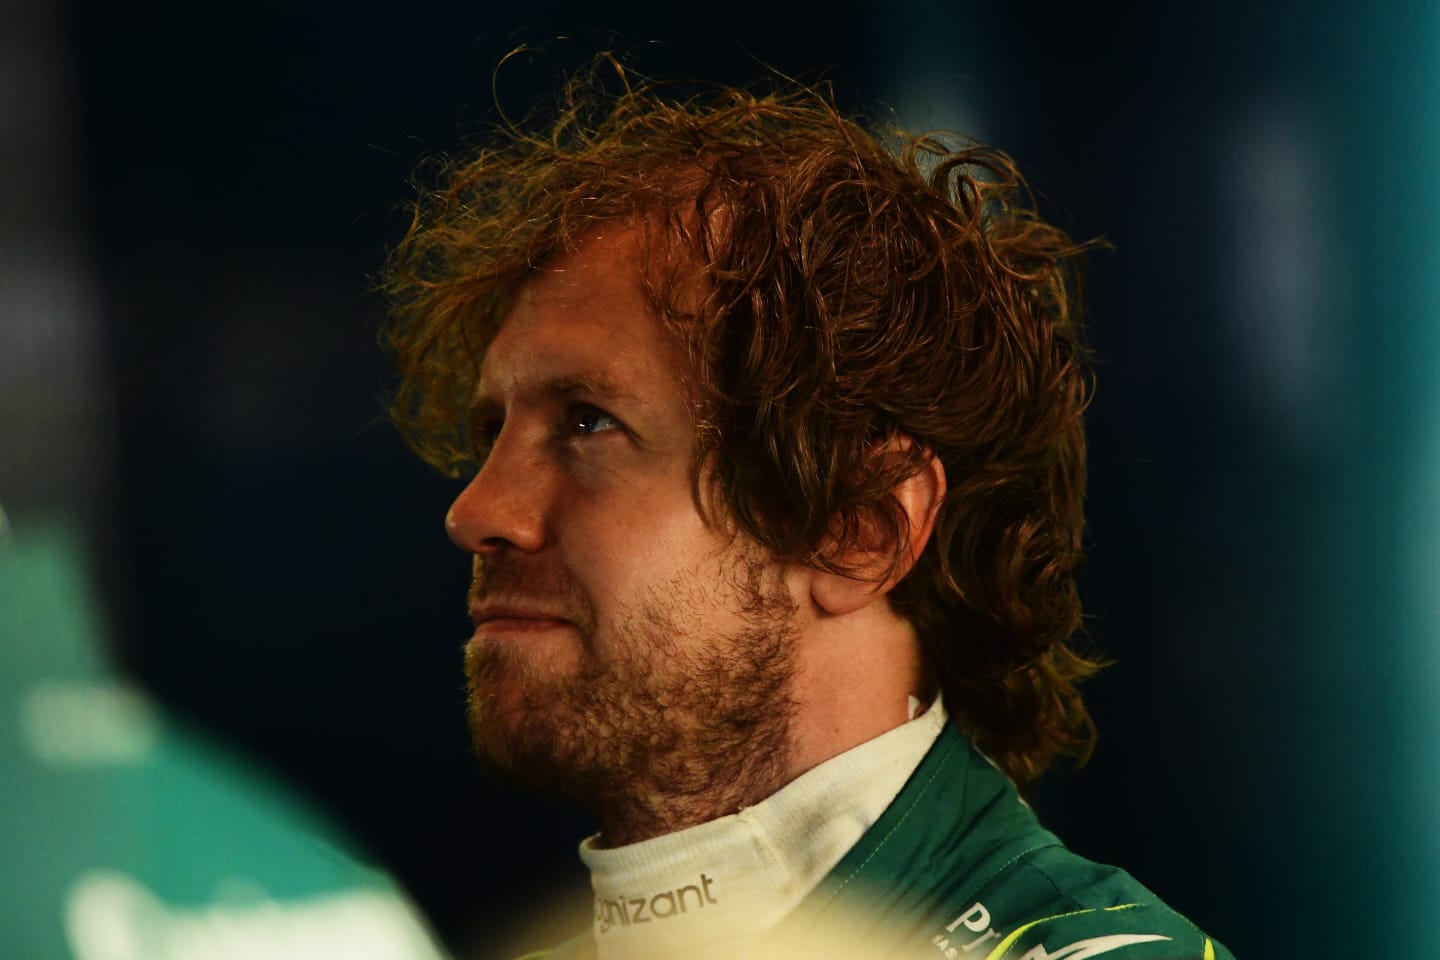 MELBOURNE, AUSTRALIA - APRIL 08: Sebastian Vettel of Germany and Aston Martin F1 Team looks on in the garage during practice ahead of the F1 Grand Prix of Australia at Melbourne Grand Prix Circuit on April 08, 2022 in Melbourne, Australia. (Photo by Mario Renzi - Formula 1/Formula 1 via Getty Images)